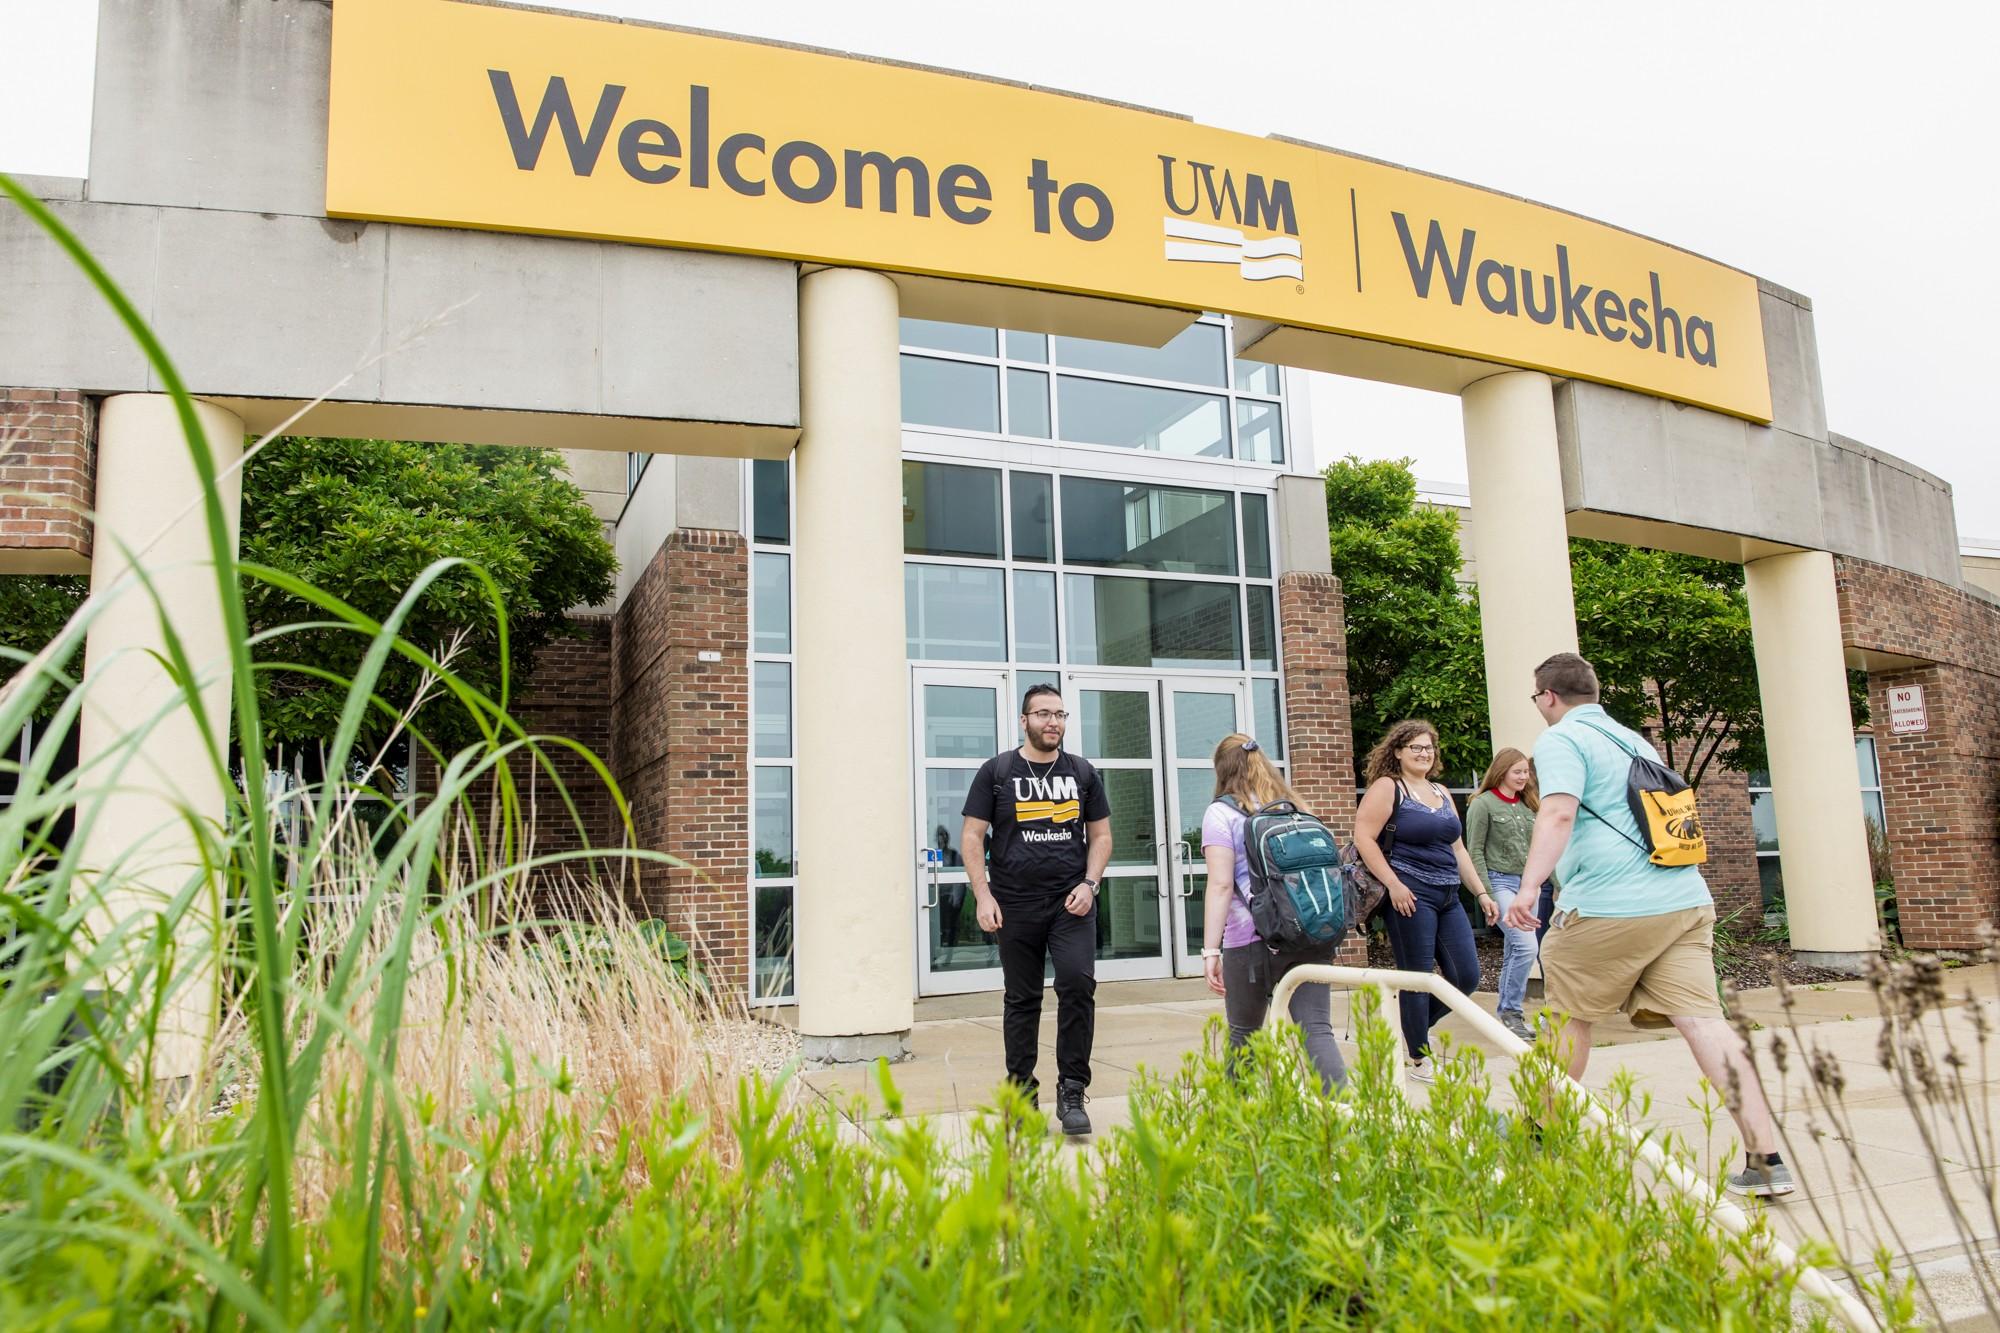 UWM at Waukesha to Cease Operations in 2025, WCTC to Host UWM University Center